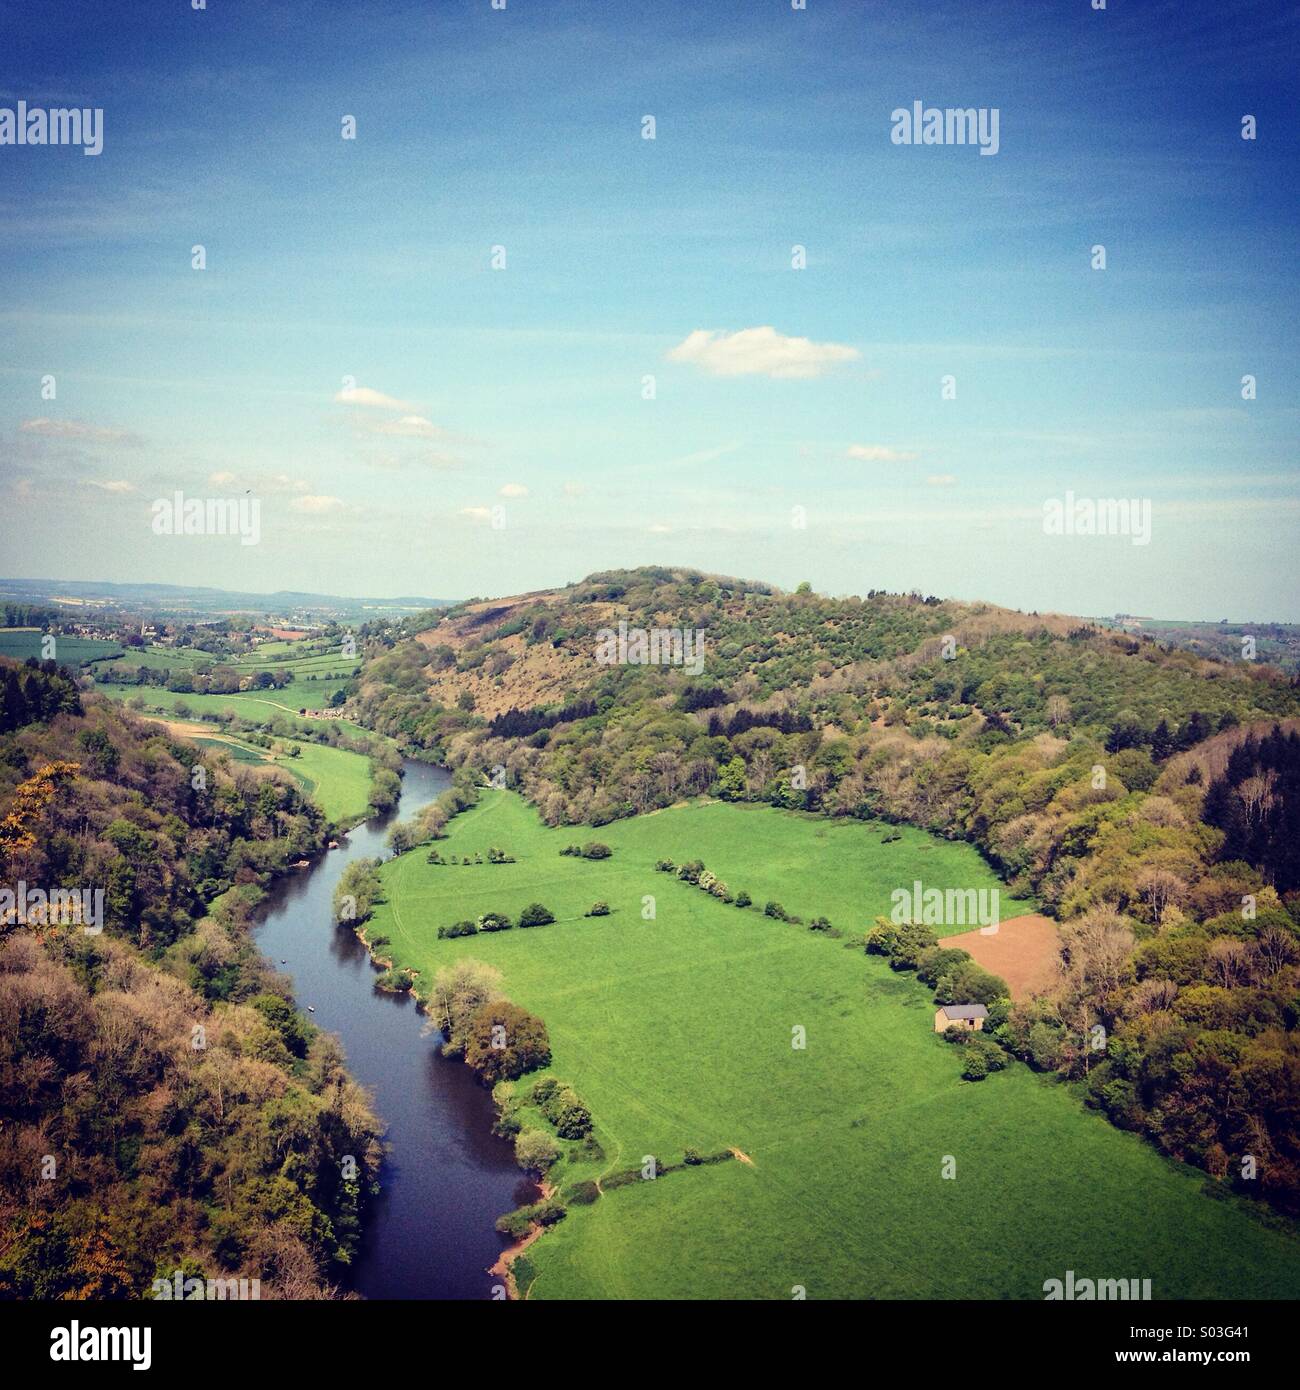 Symonds Yat, England. Famous view over river Stock Photo